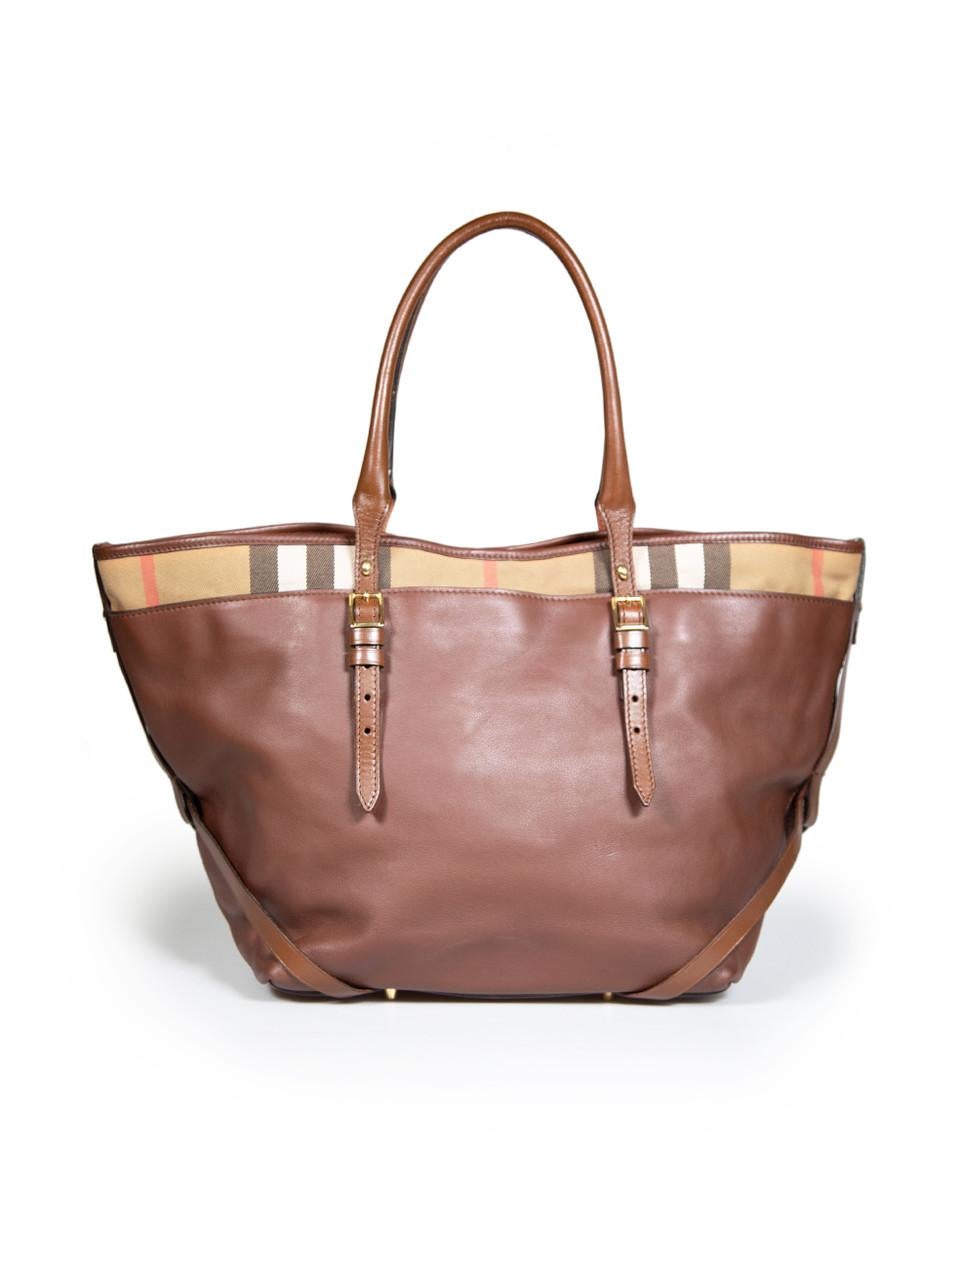 Burberry Brown Leather Medium Nova Check Salisbury Tote In Excellent Condition For Sale In London, GB